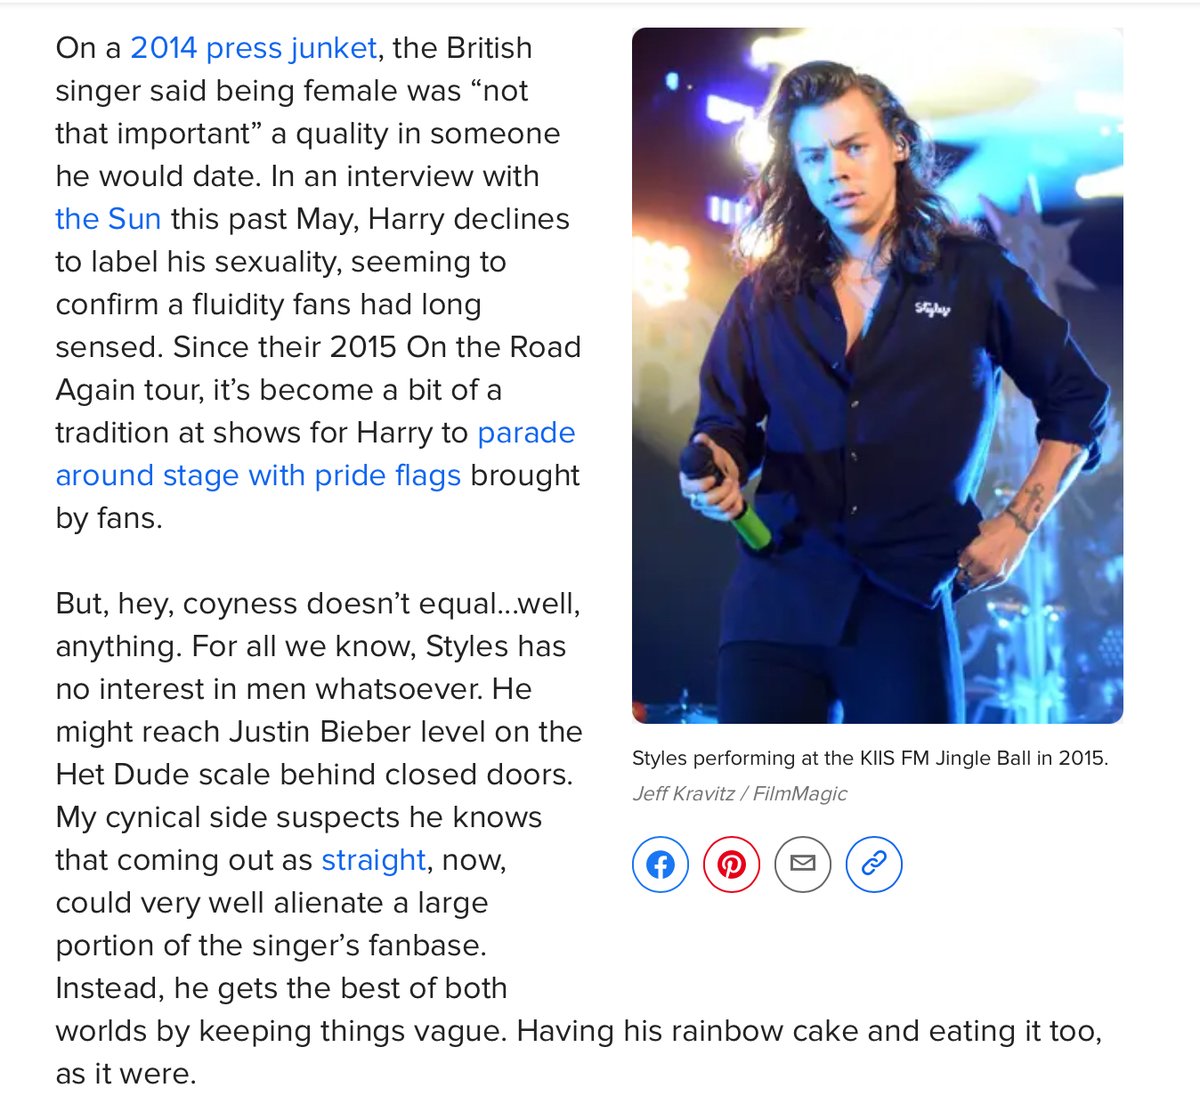 Even after being asked so many times, Harry was still being accused of or suspected of queerbaiting. Note this 2017 article in Buzzfeed in which the author speculates exactly that  https://www.buzzfeed.com/graceeperry/why-are-so-many-queer-women-obsessed-with-harry-styles